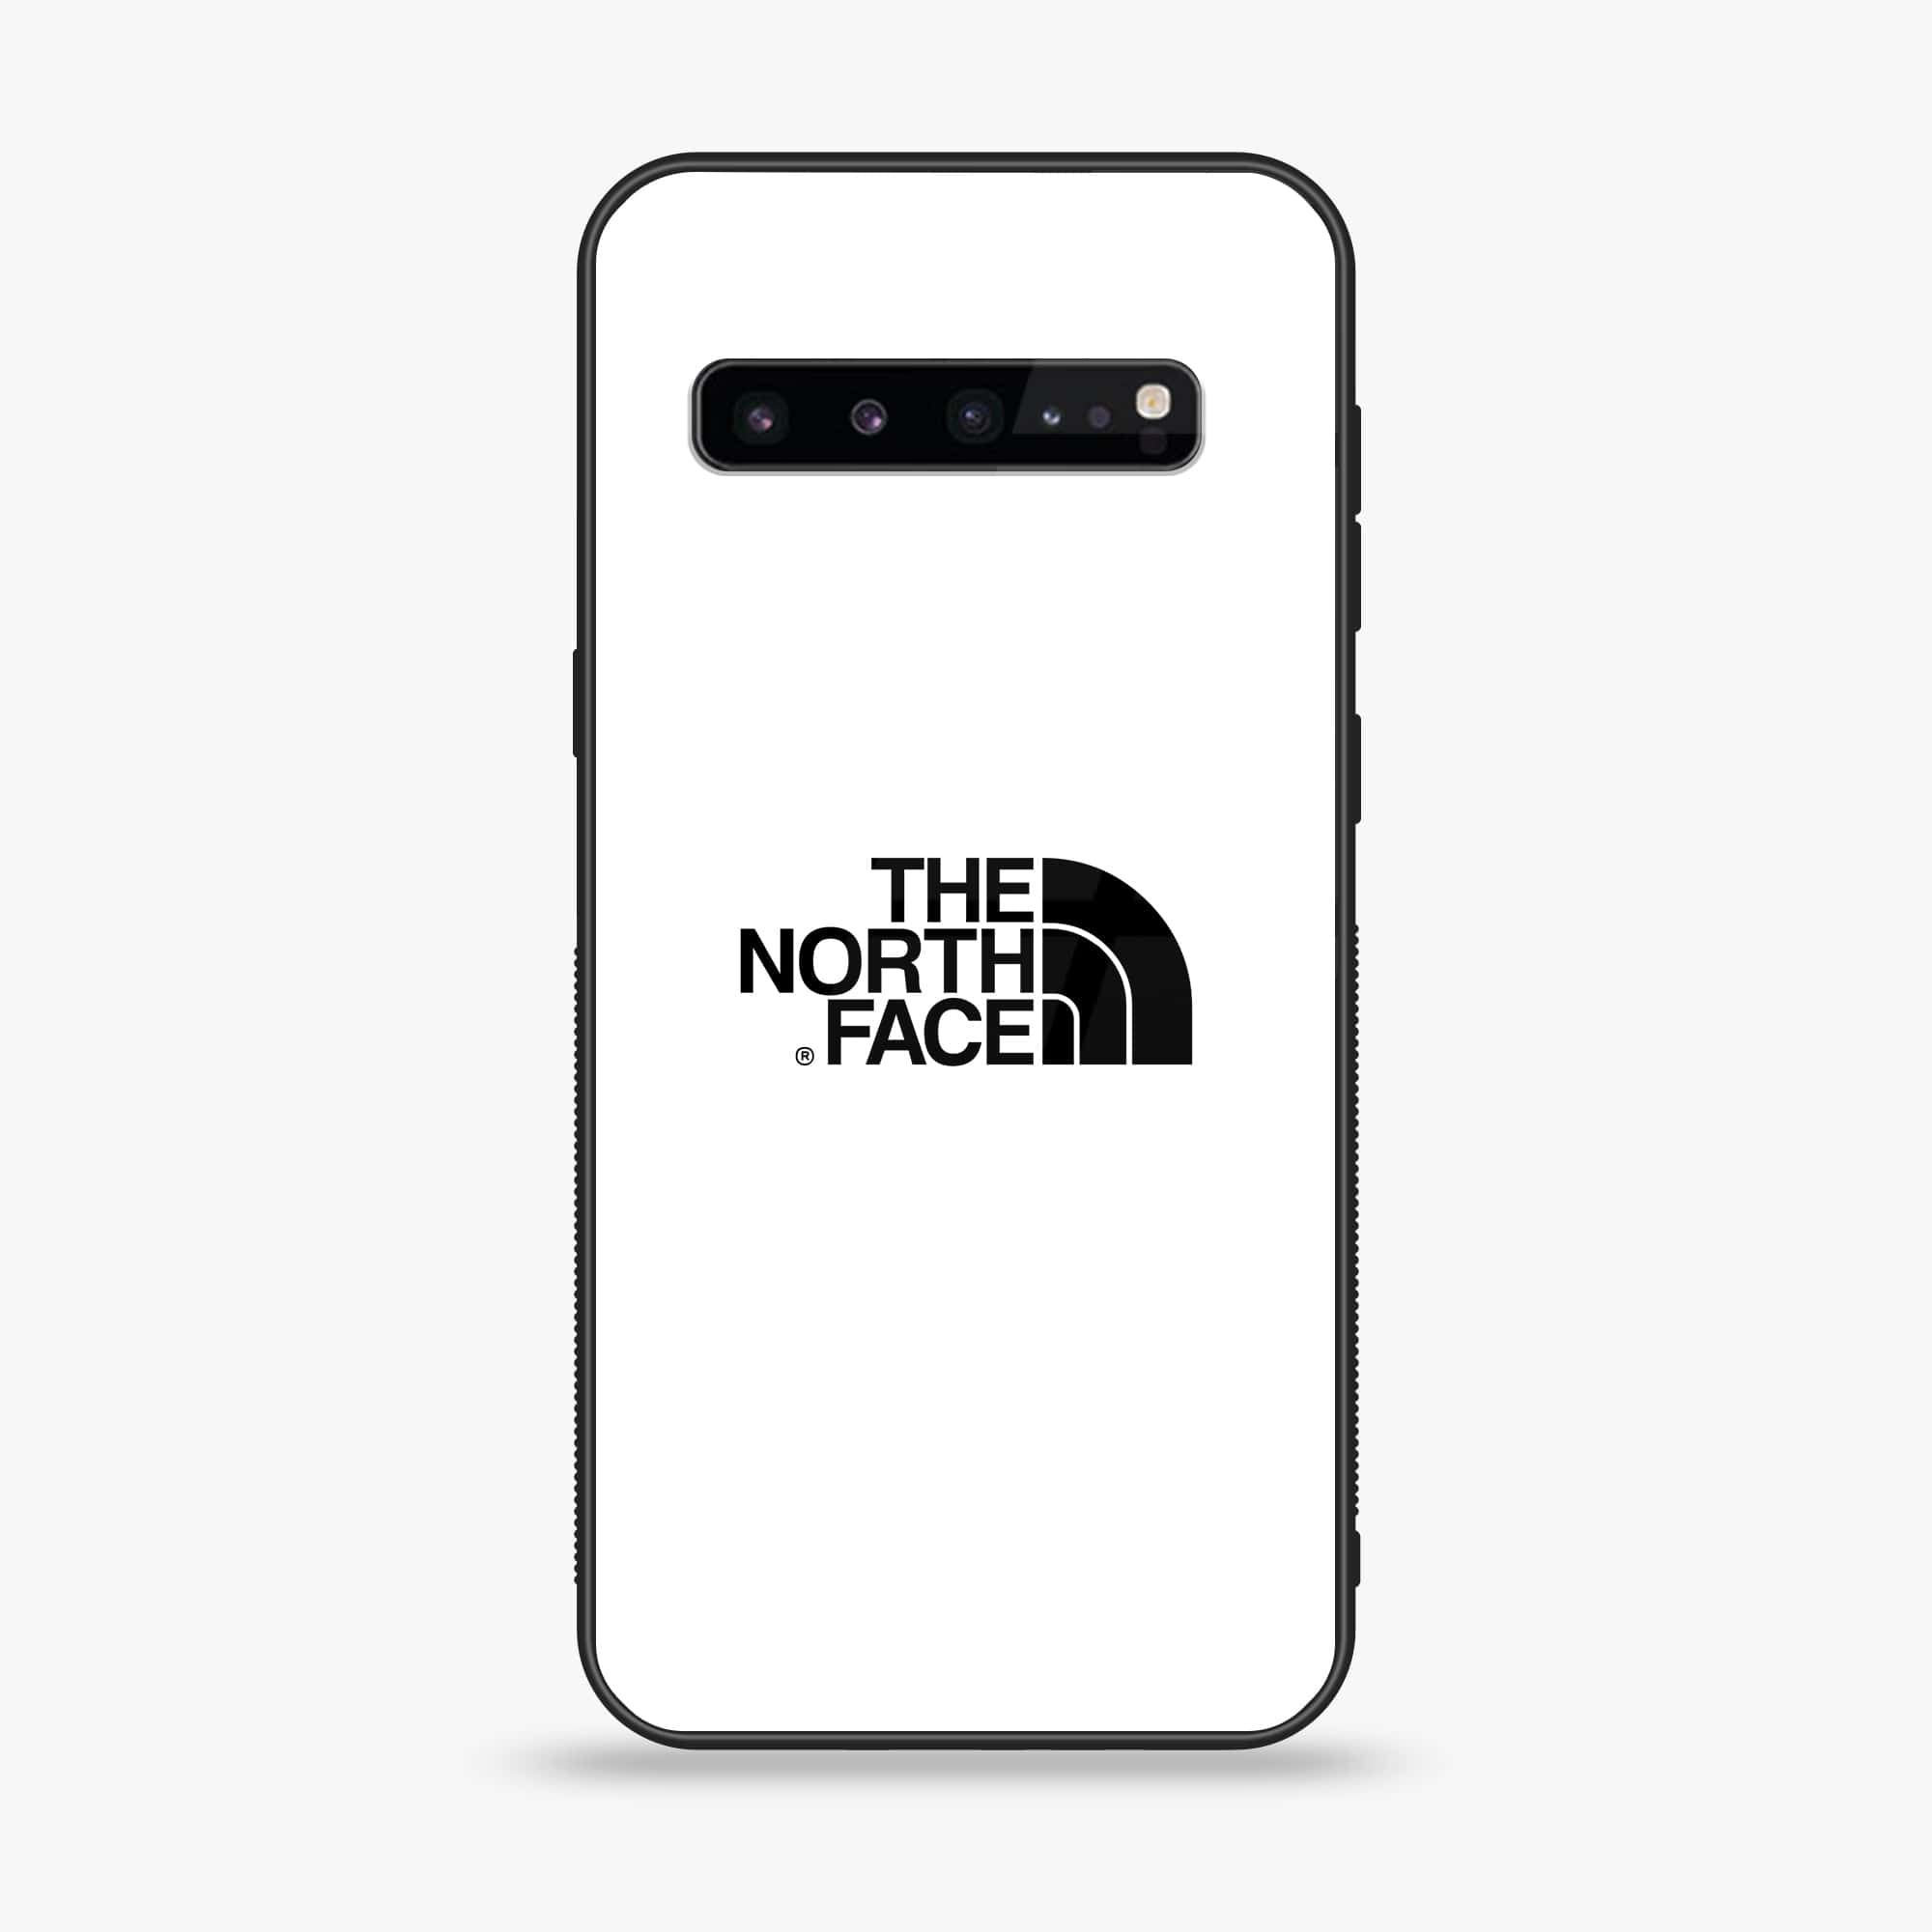 Samsung Galaxy S10 5G - The North Face Series - Premium Printed Glass soft Bumper shock Proof Case